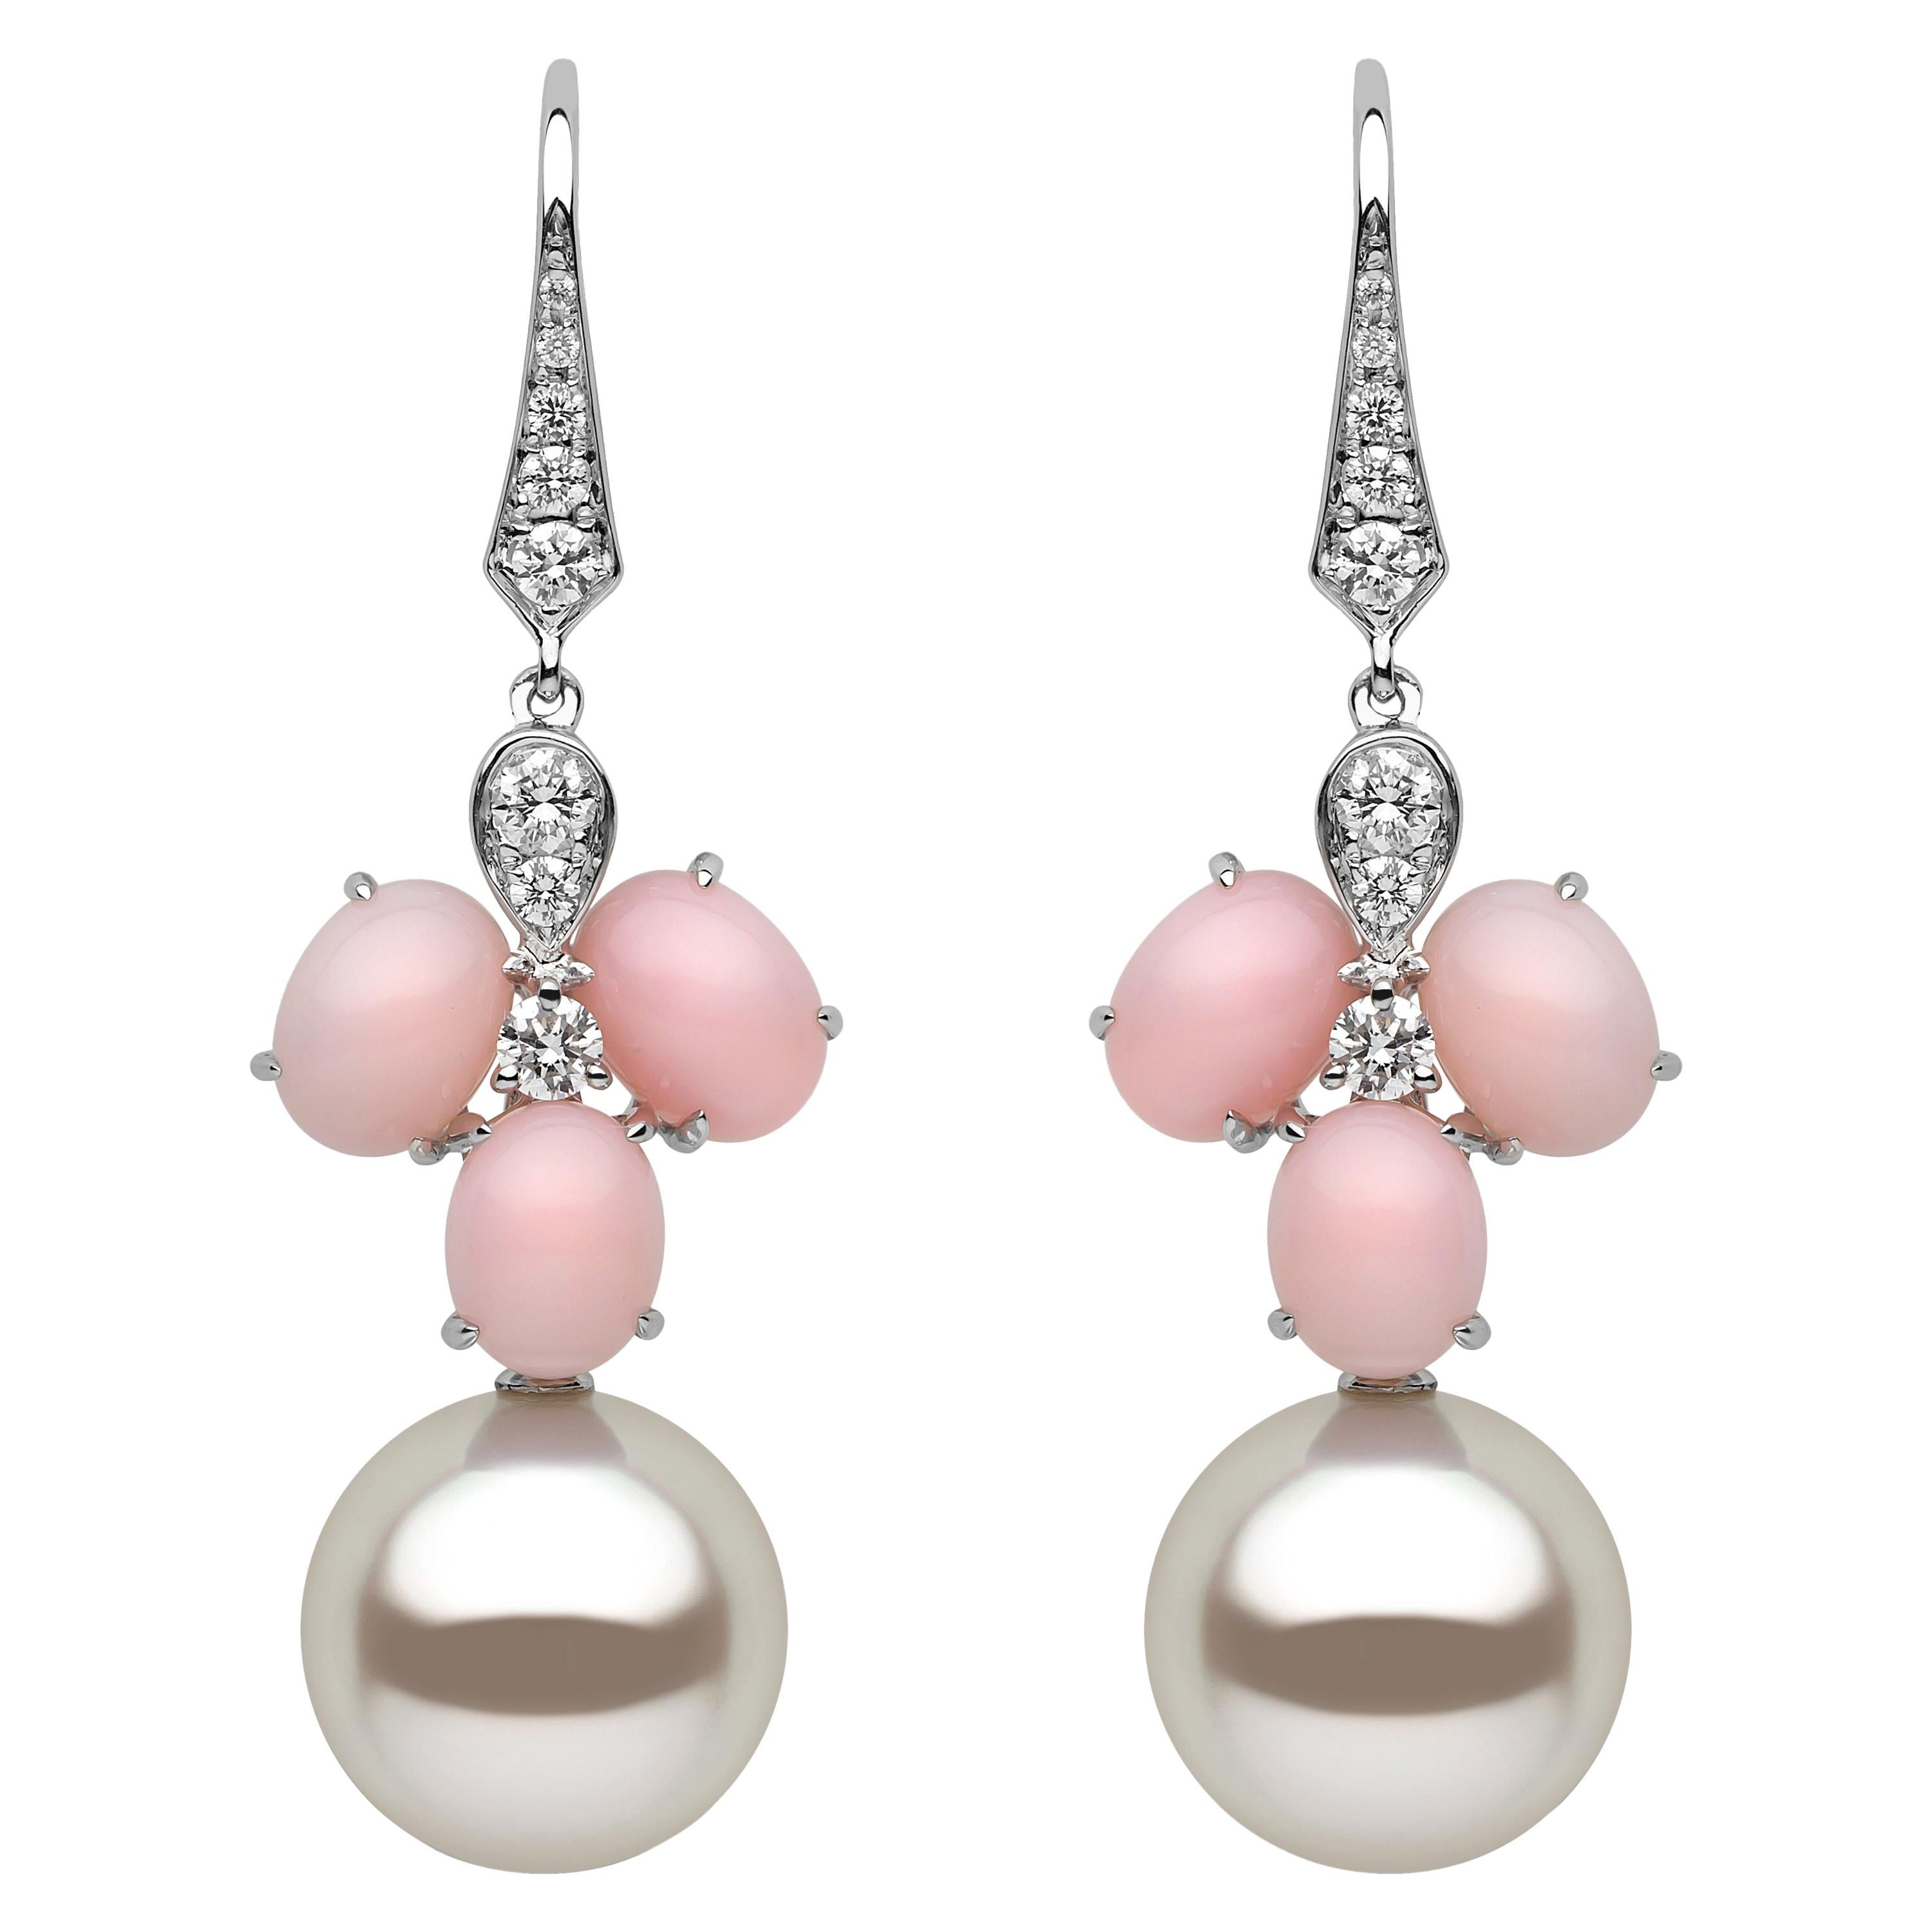 Yoko London South Sea Pearl, Coral and Diamond Earrings in 18 Karat White Gold For Sale